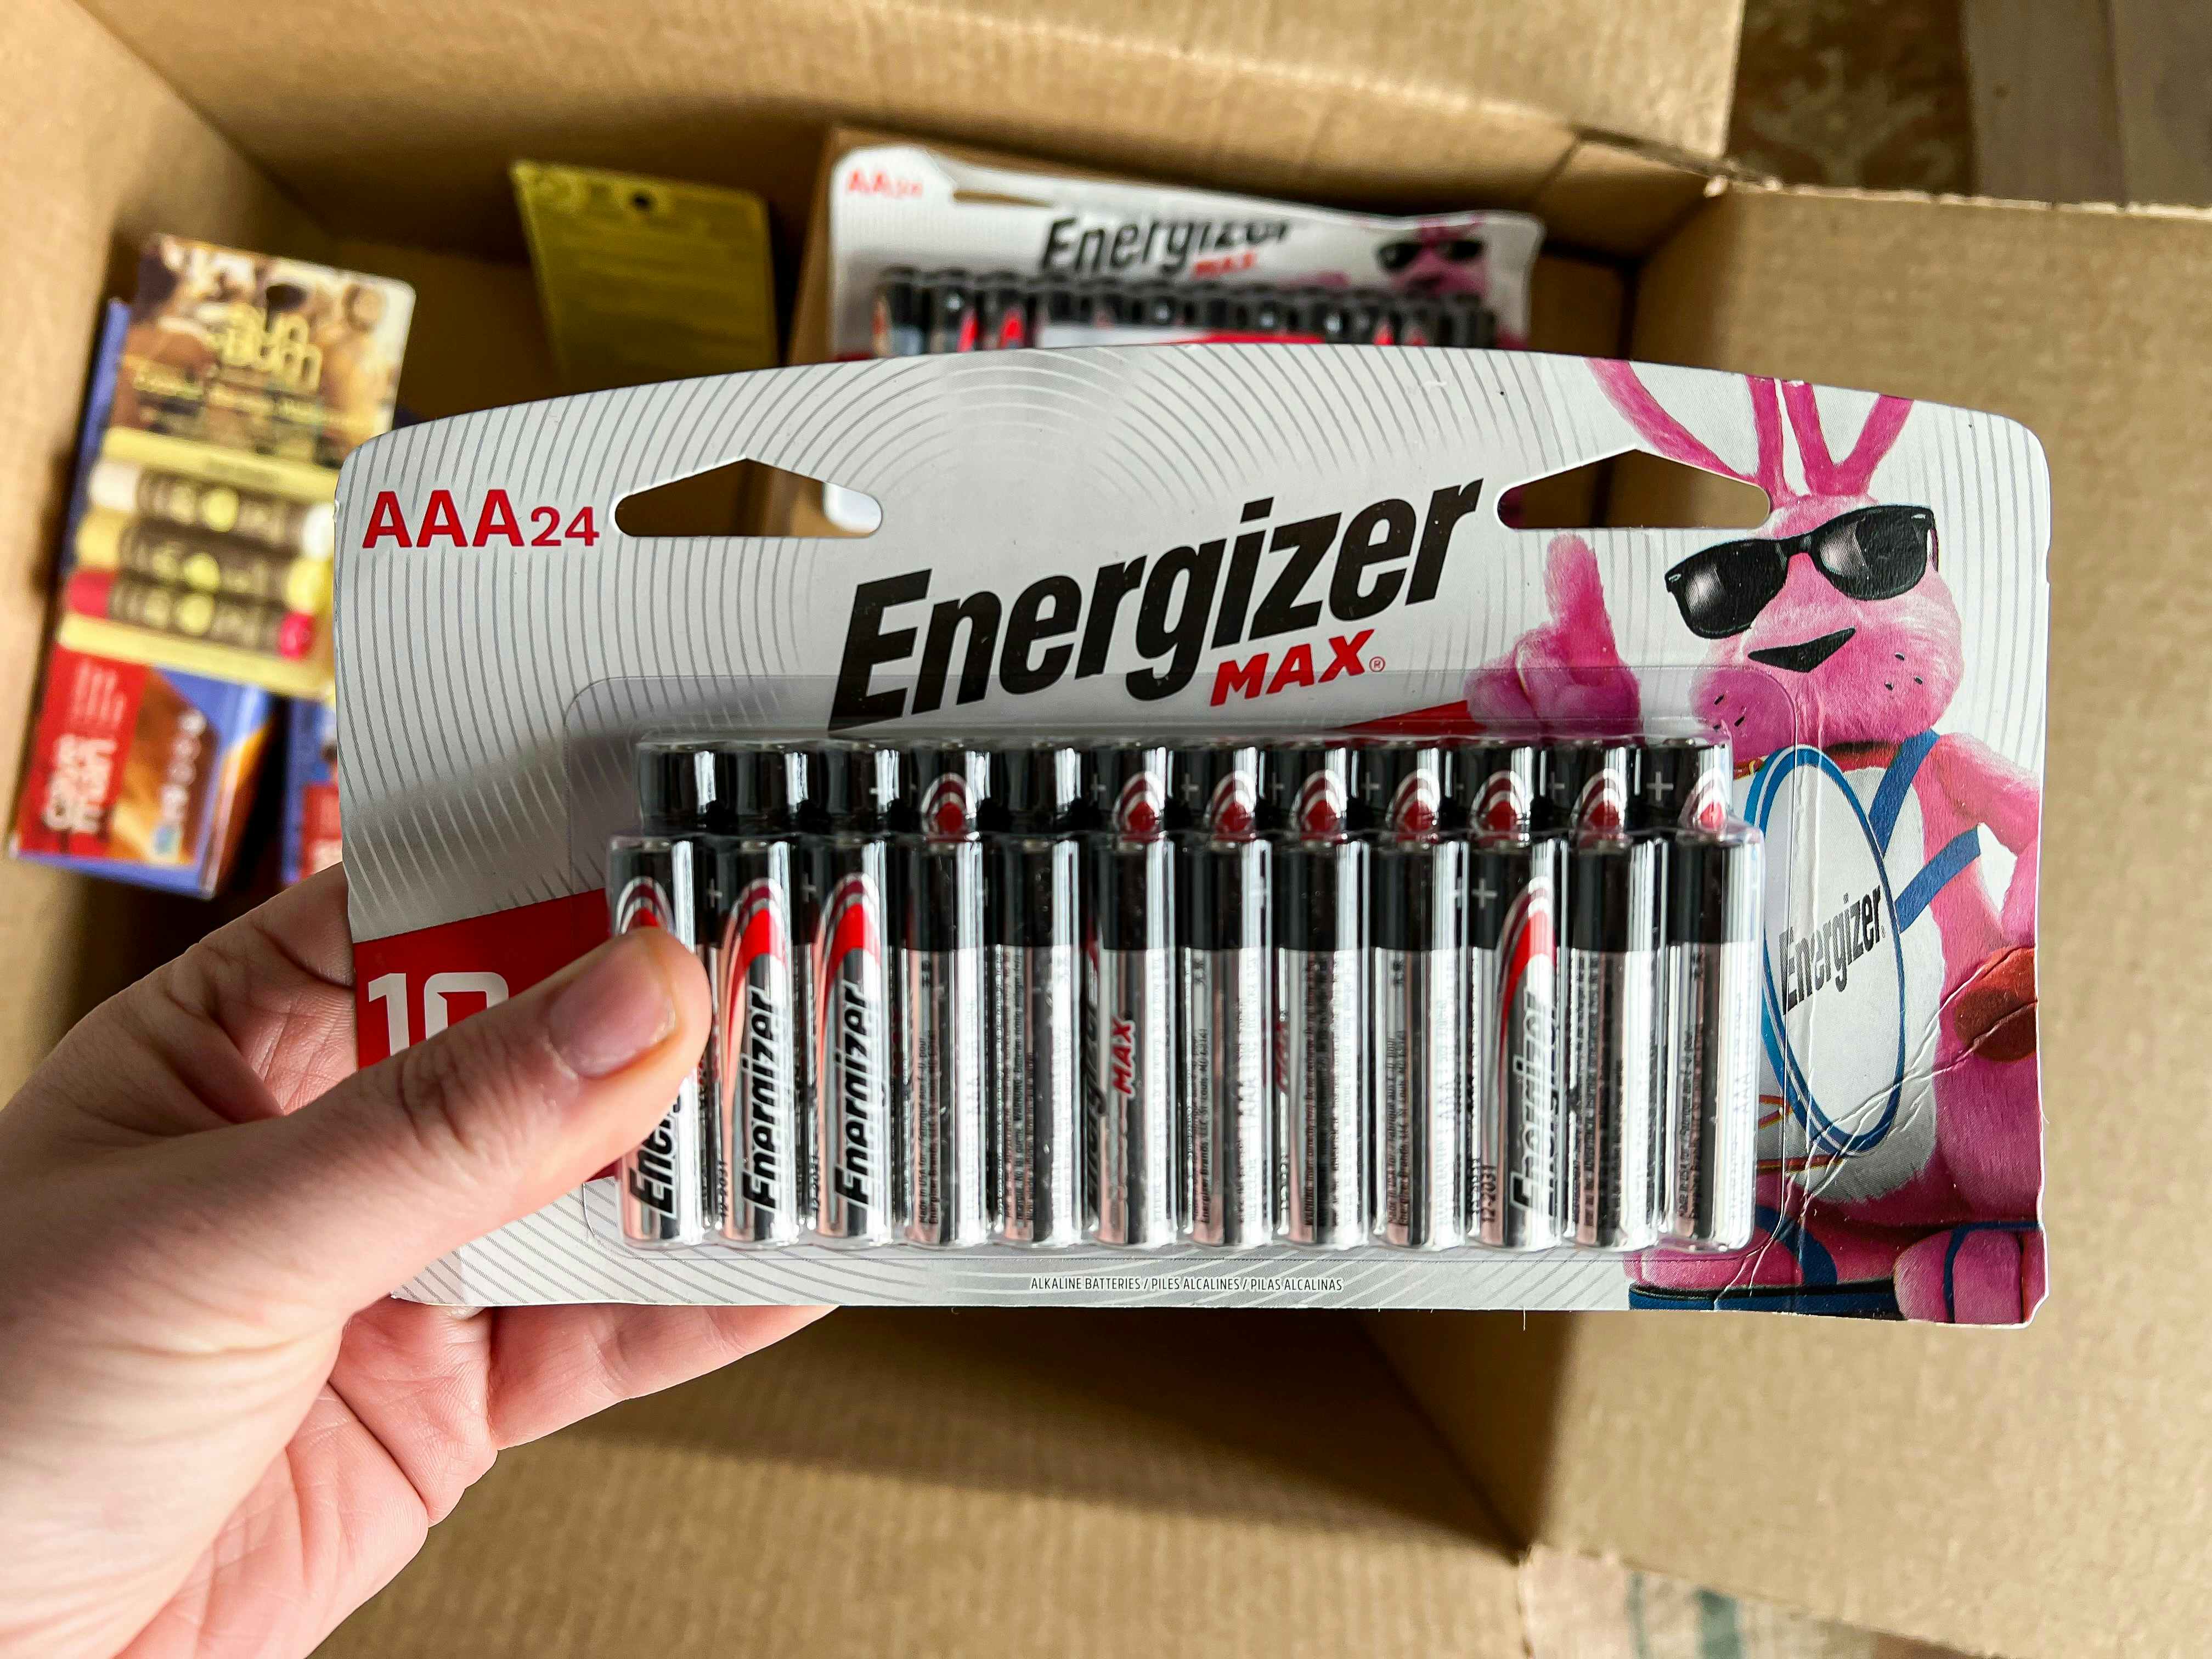 person holding energizer max AAA 24-count batteries near box